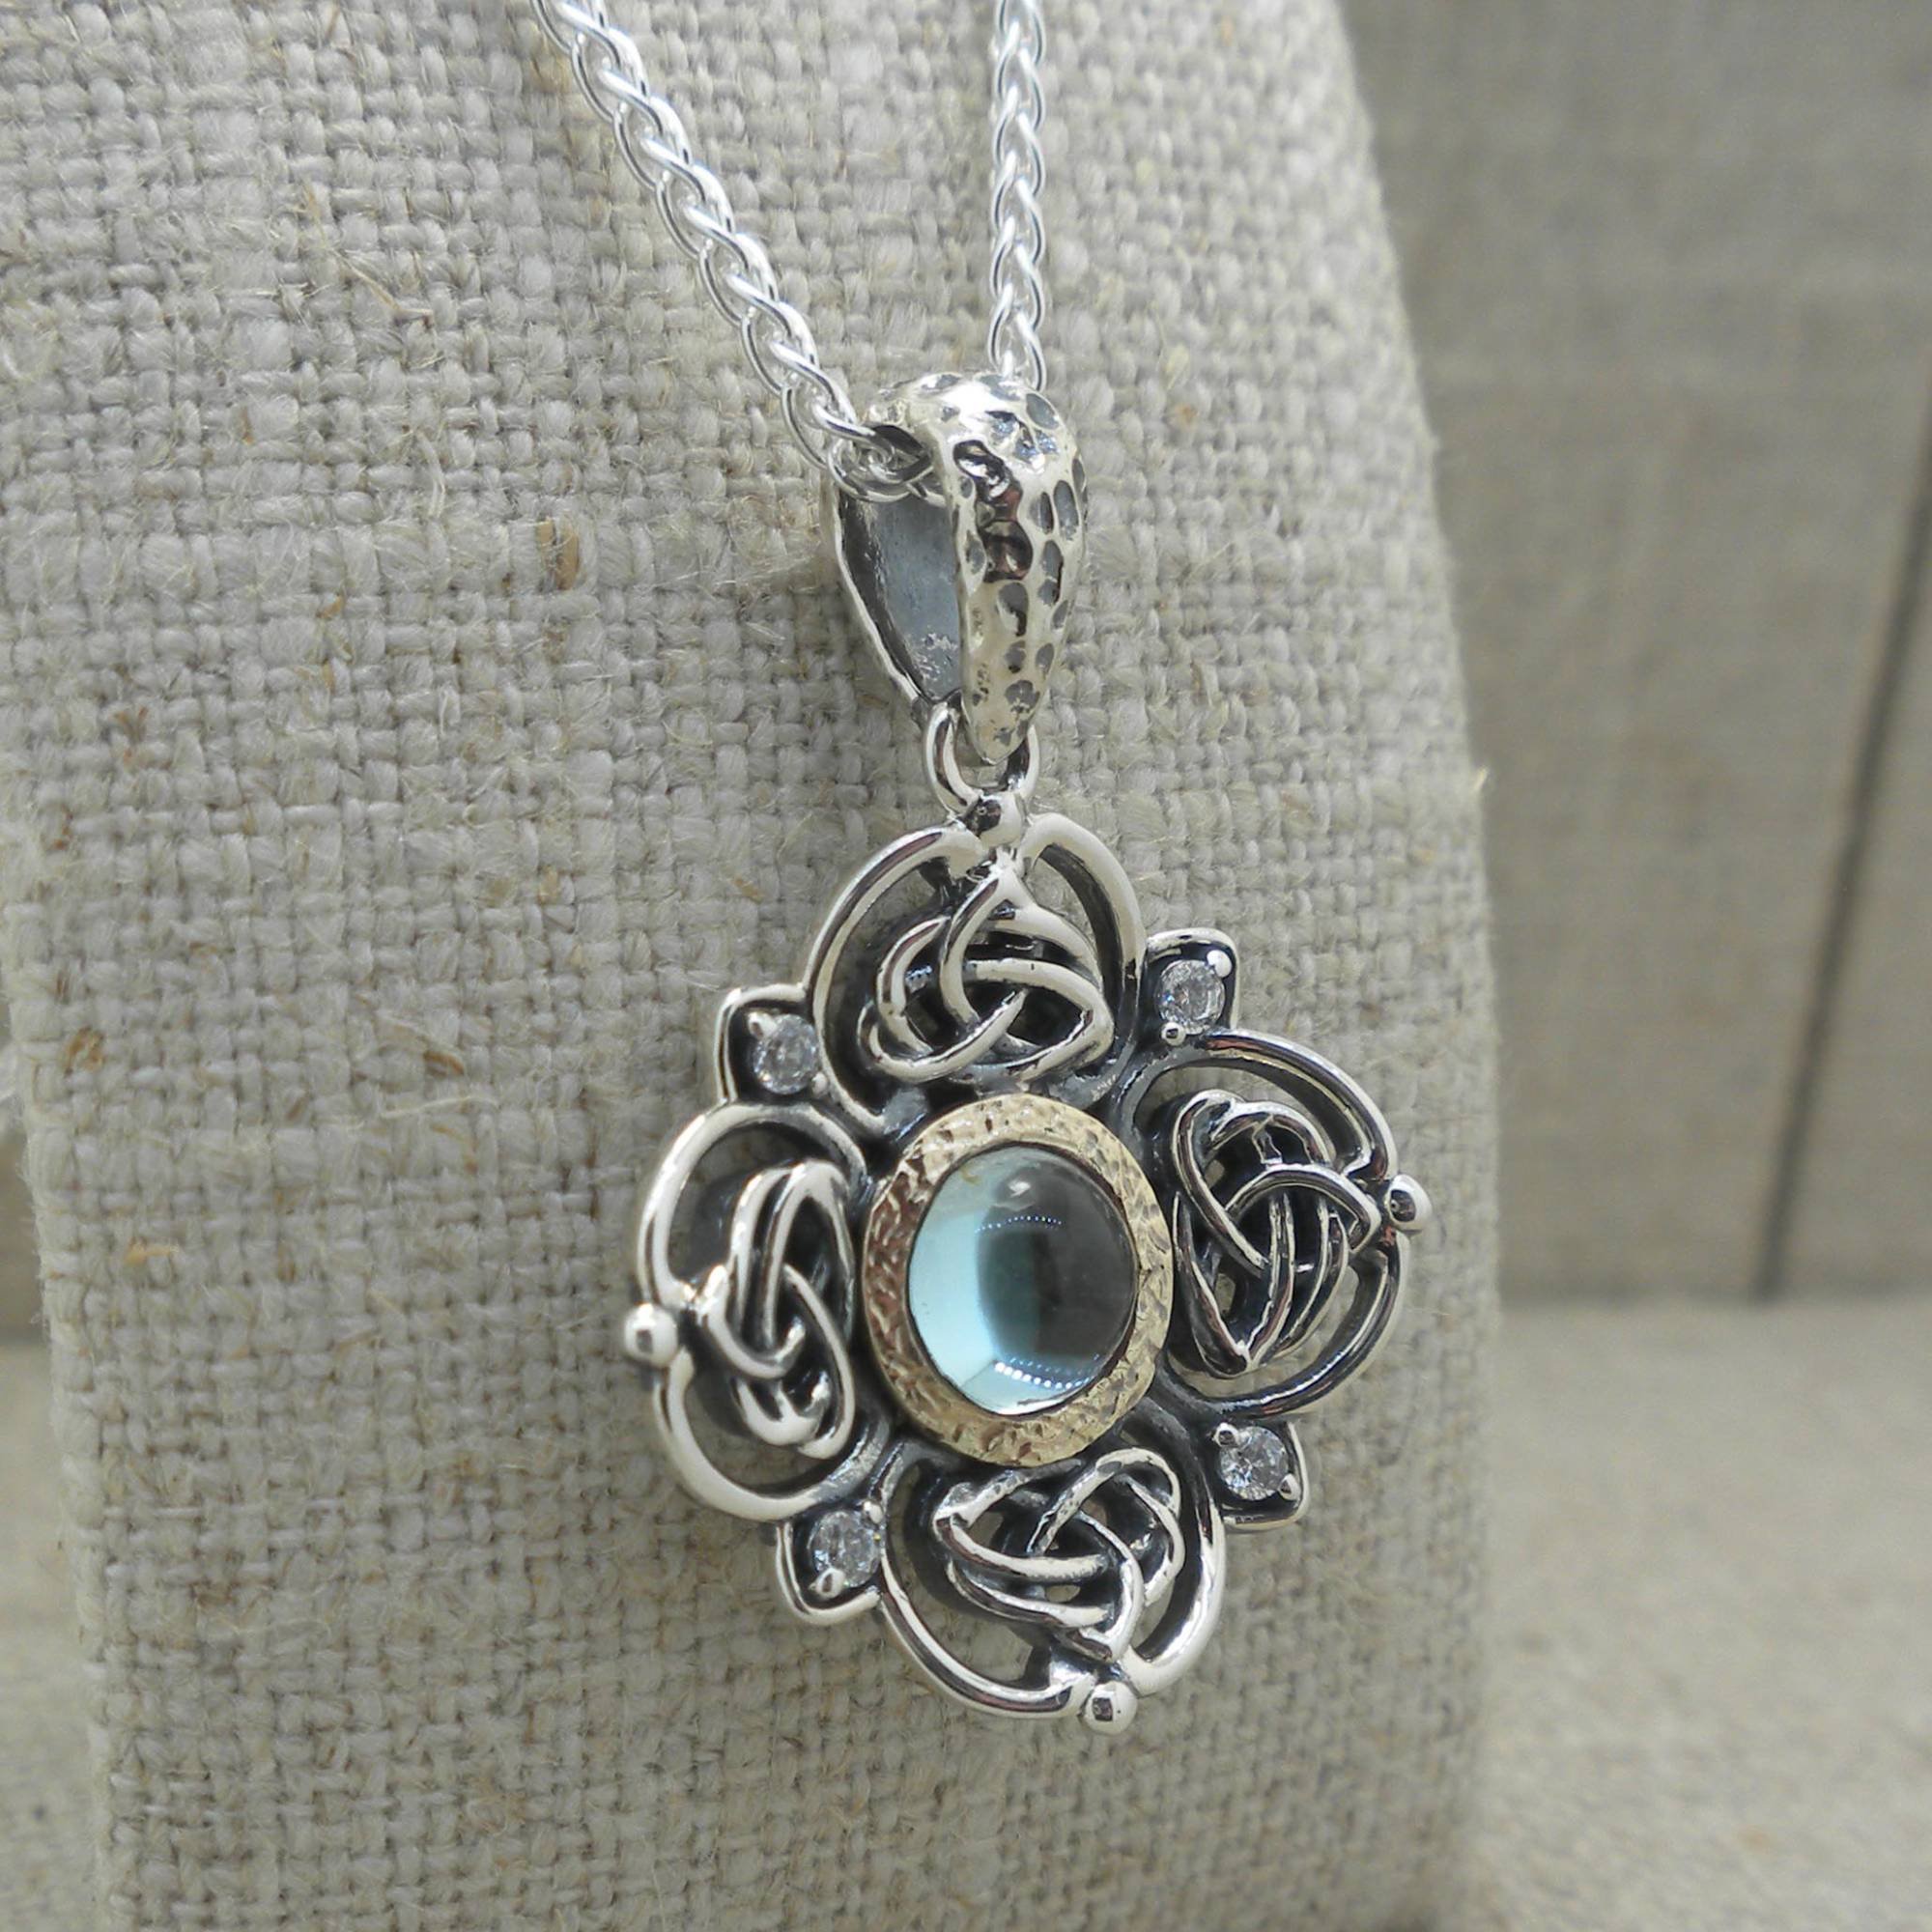 Celestial Pendant with Blue topaz by Keith Jack